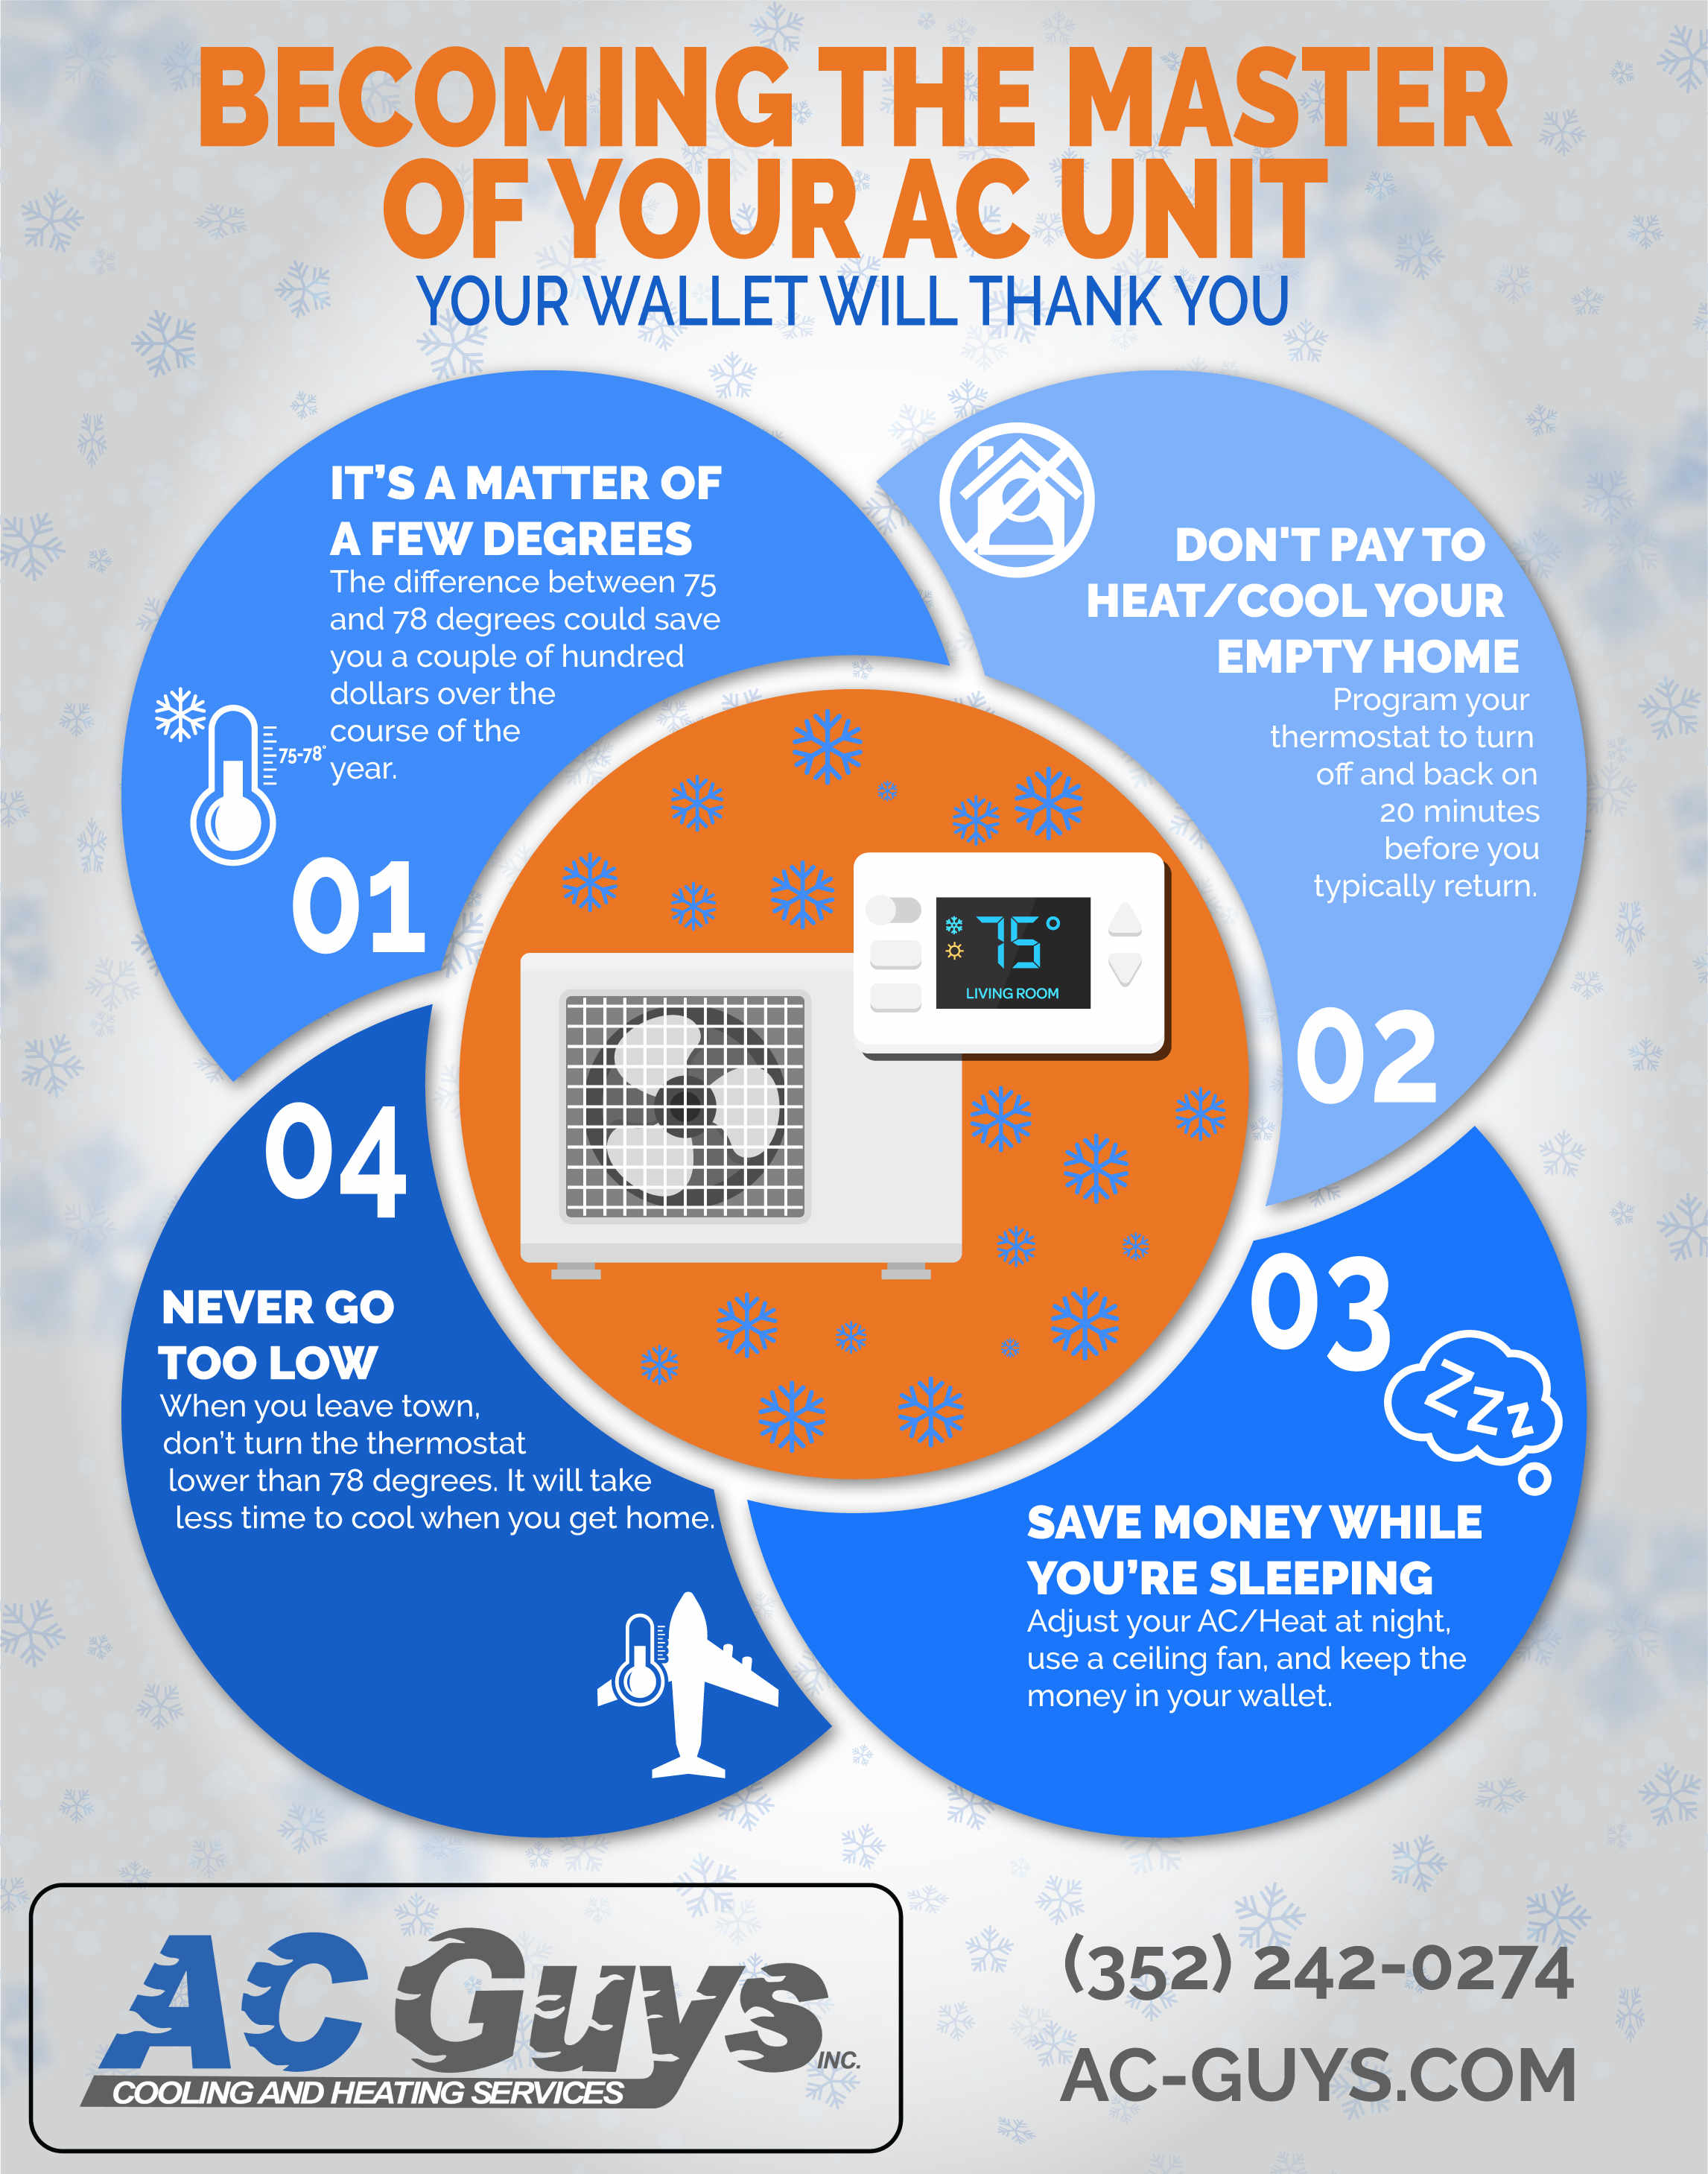 Becoming the Master of Your AC Unit: Your Wallet Will Thank You